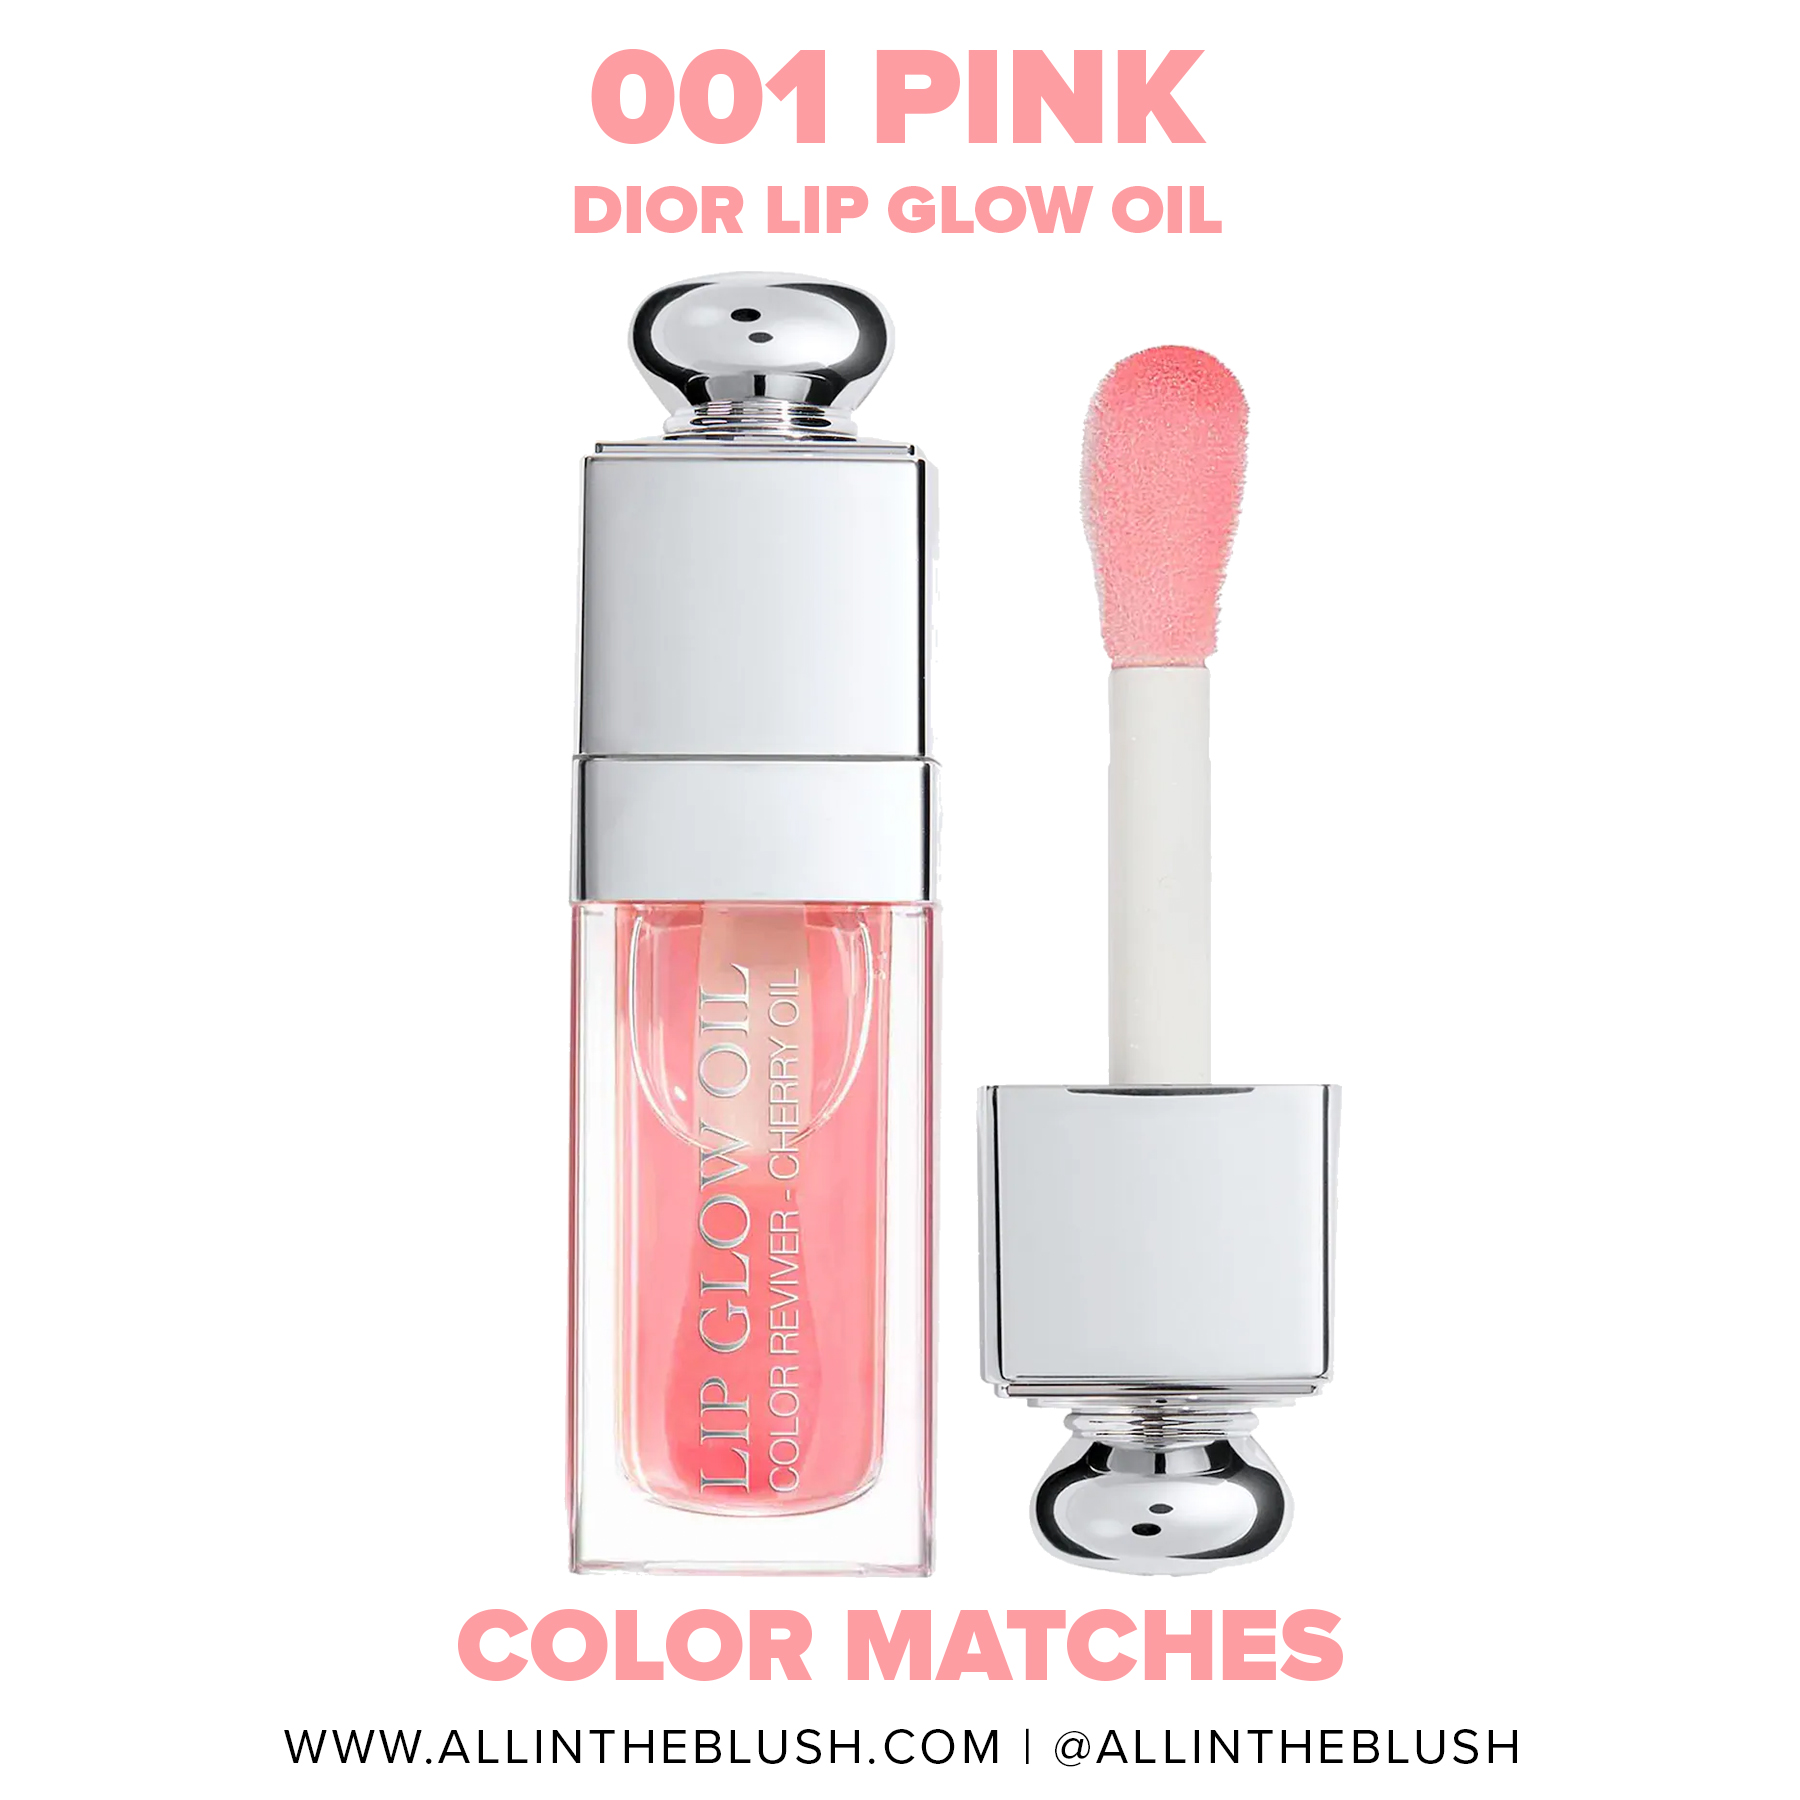 Dior 001 Pink Addict Lip Glow Oil Dupes - All In The Blush